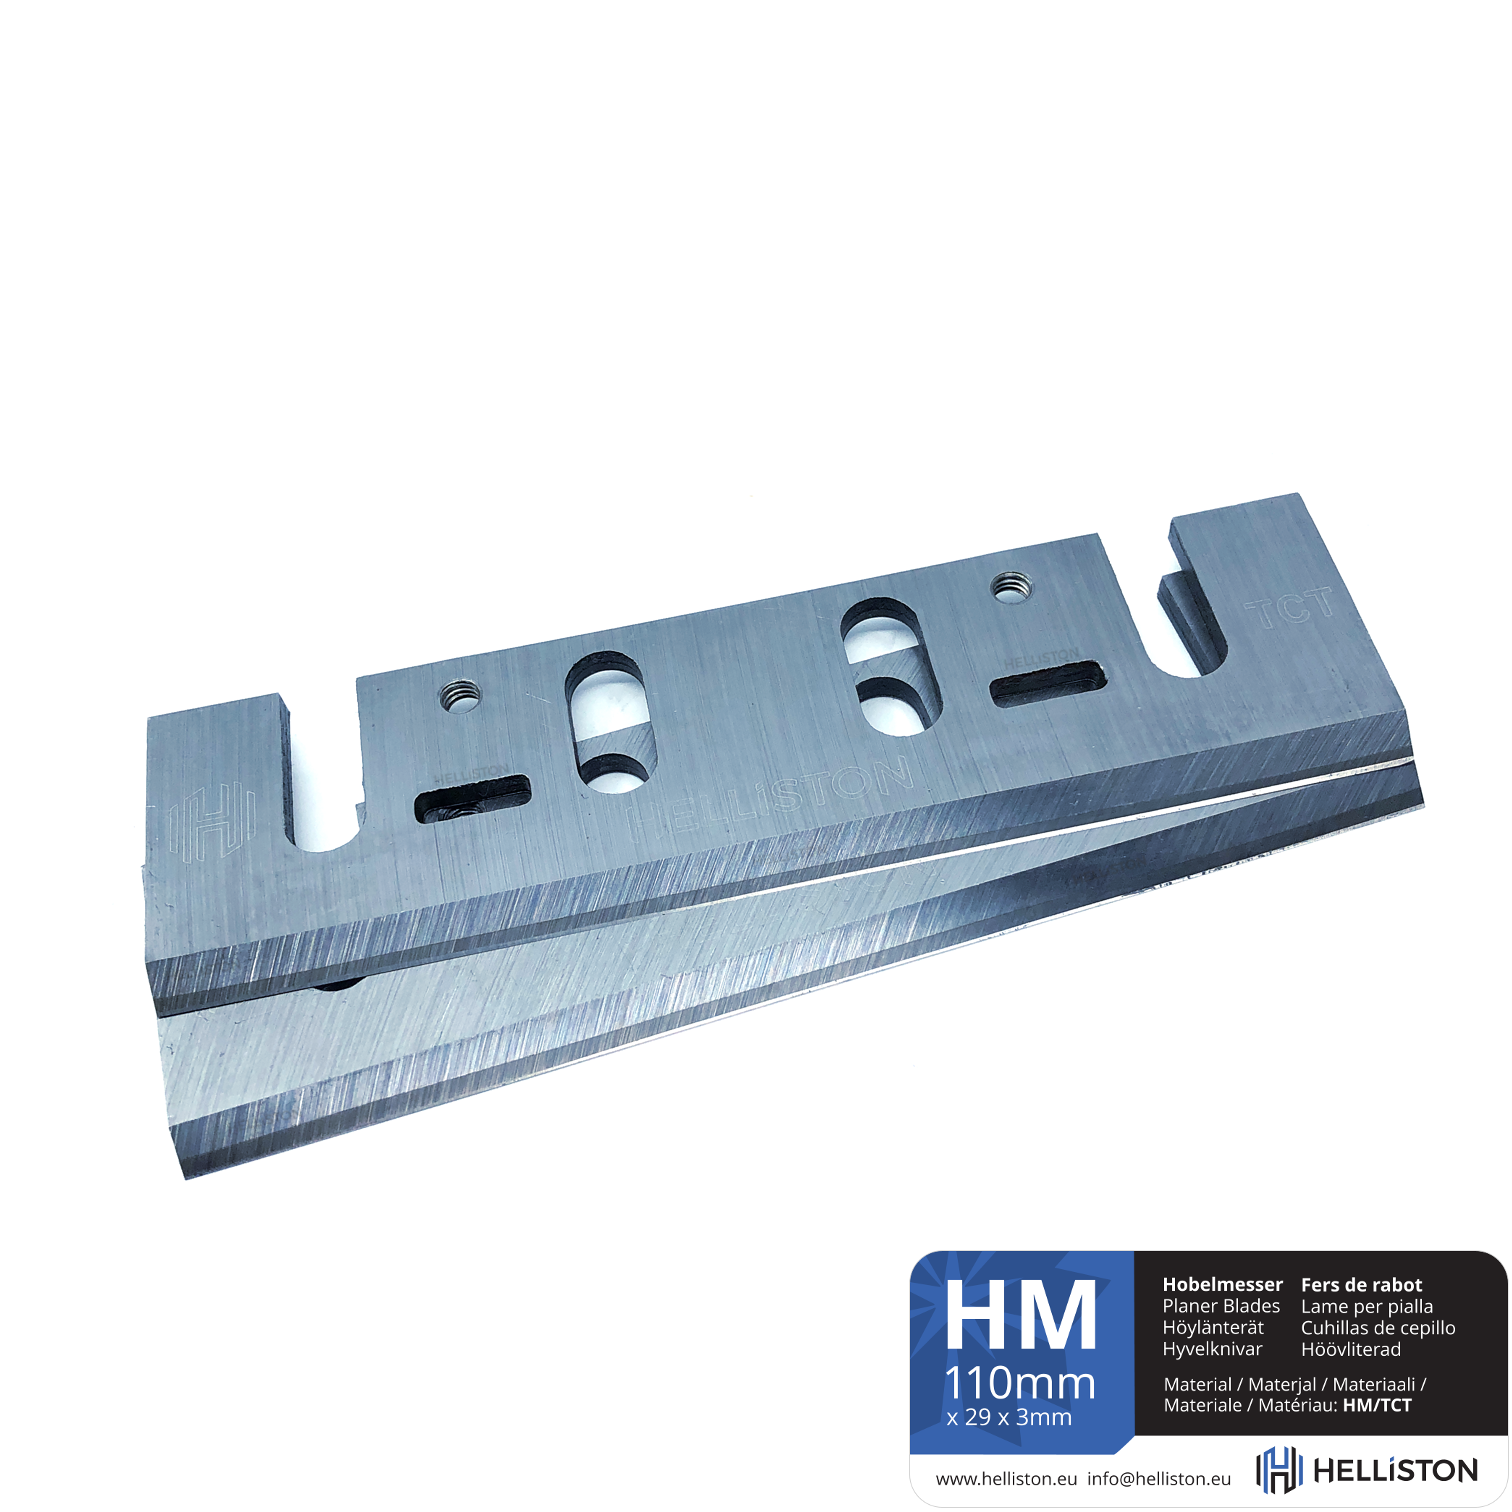 HM Planer Blades 110 x 29 x 3mm, Wolframcarbid, Tungsten Carbide Blades, Hard metal, Makita, 1805, 1805B, 1805N, Europe, Germany, England, Great Britain, France, de, fr, co.uk, resharpanable, sharpanple, planer blade sharping, sharp, durable, Canada, USA, Australia, Carpentry, woodworking, UK, electric hand planer, review, rewiev, parts, power planer, manual